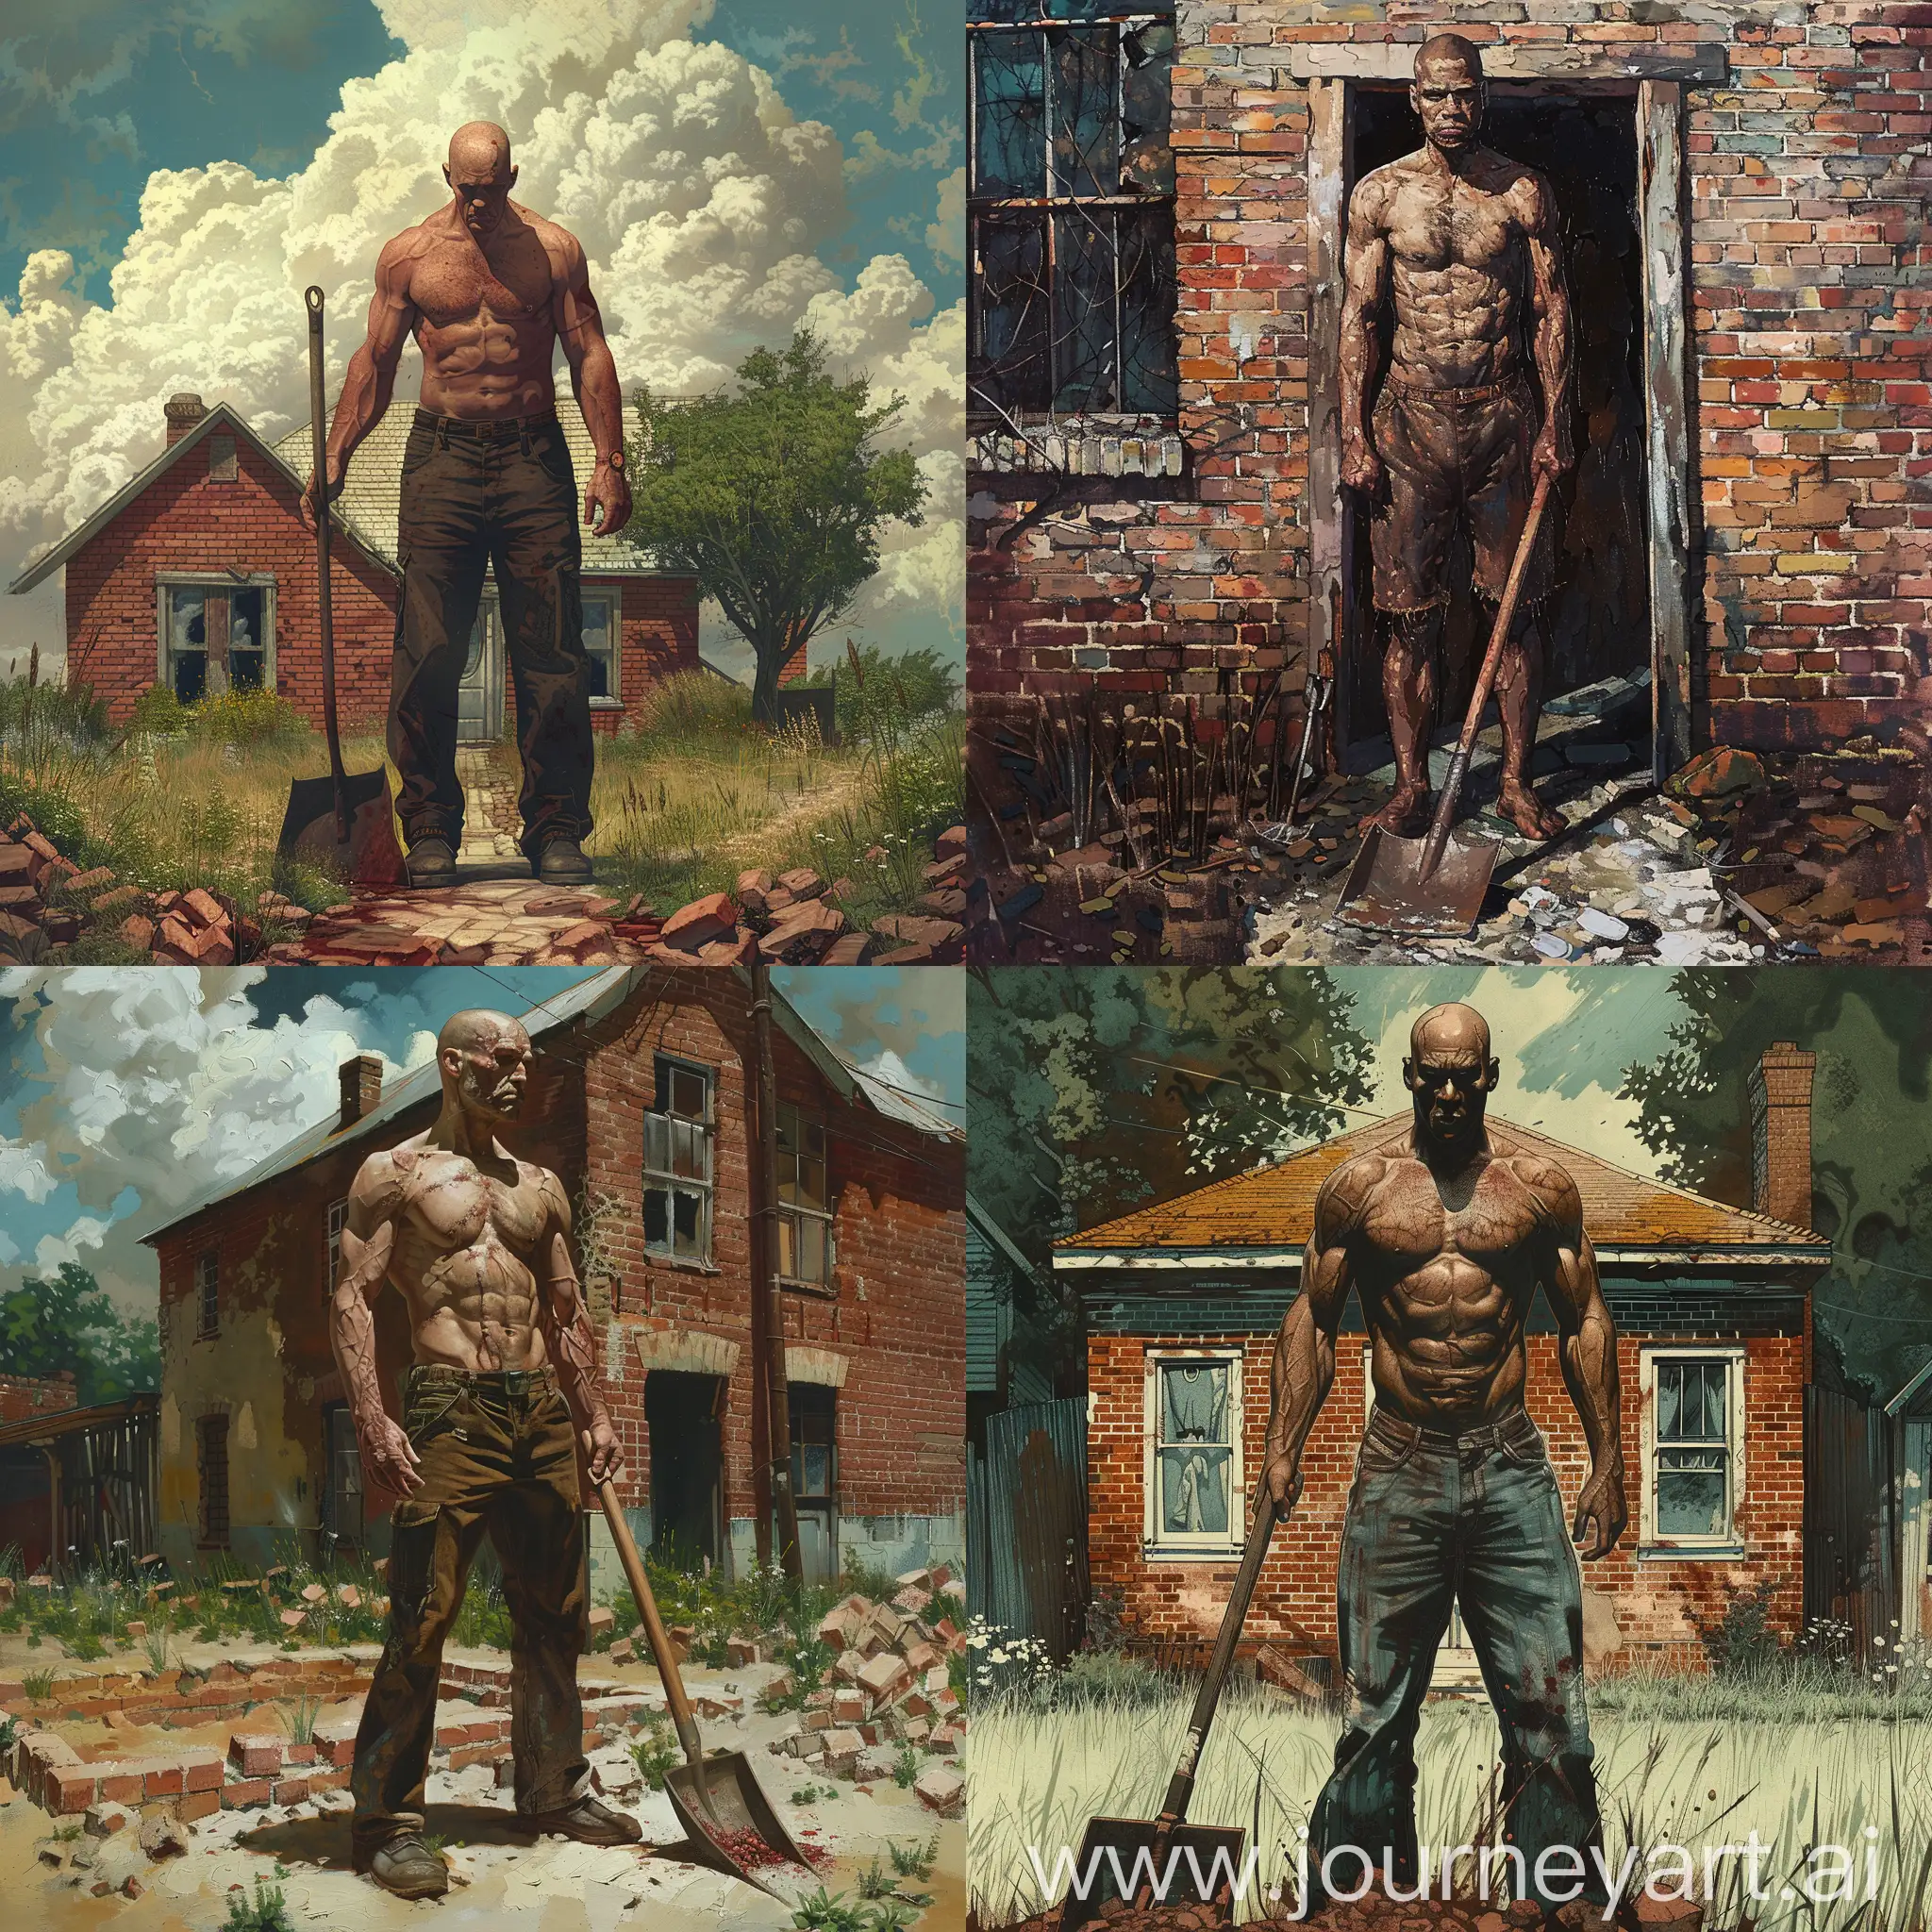 A man with a powerful build and no hair on his head, looking to be thirty years old, stands with a shovel in front of a brick house, doing burial in two-dimensional space.